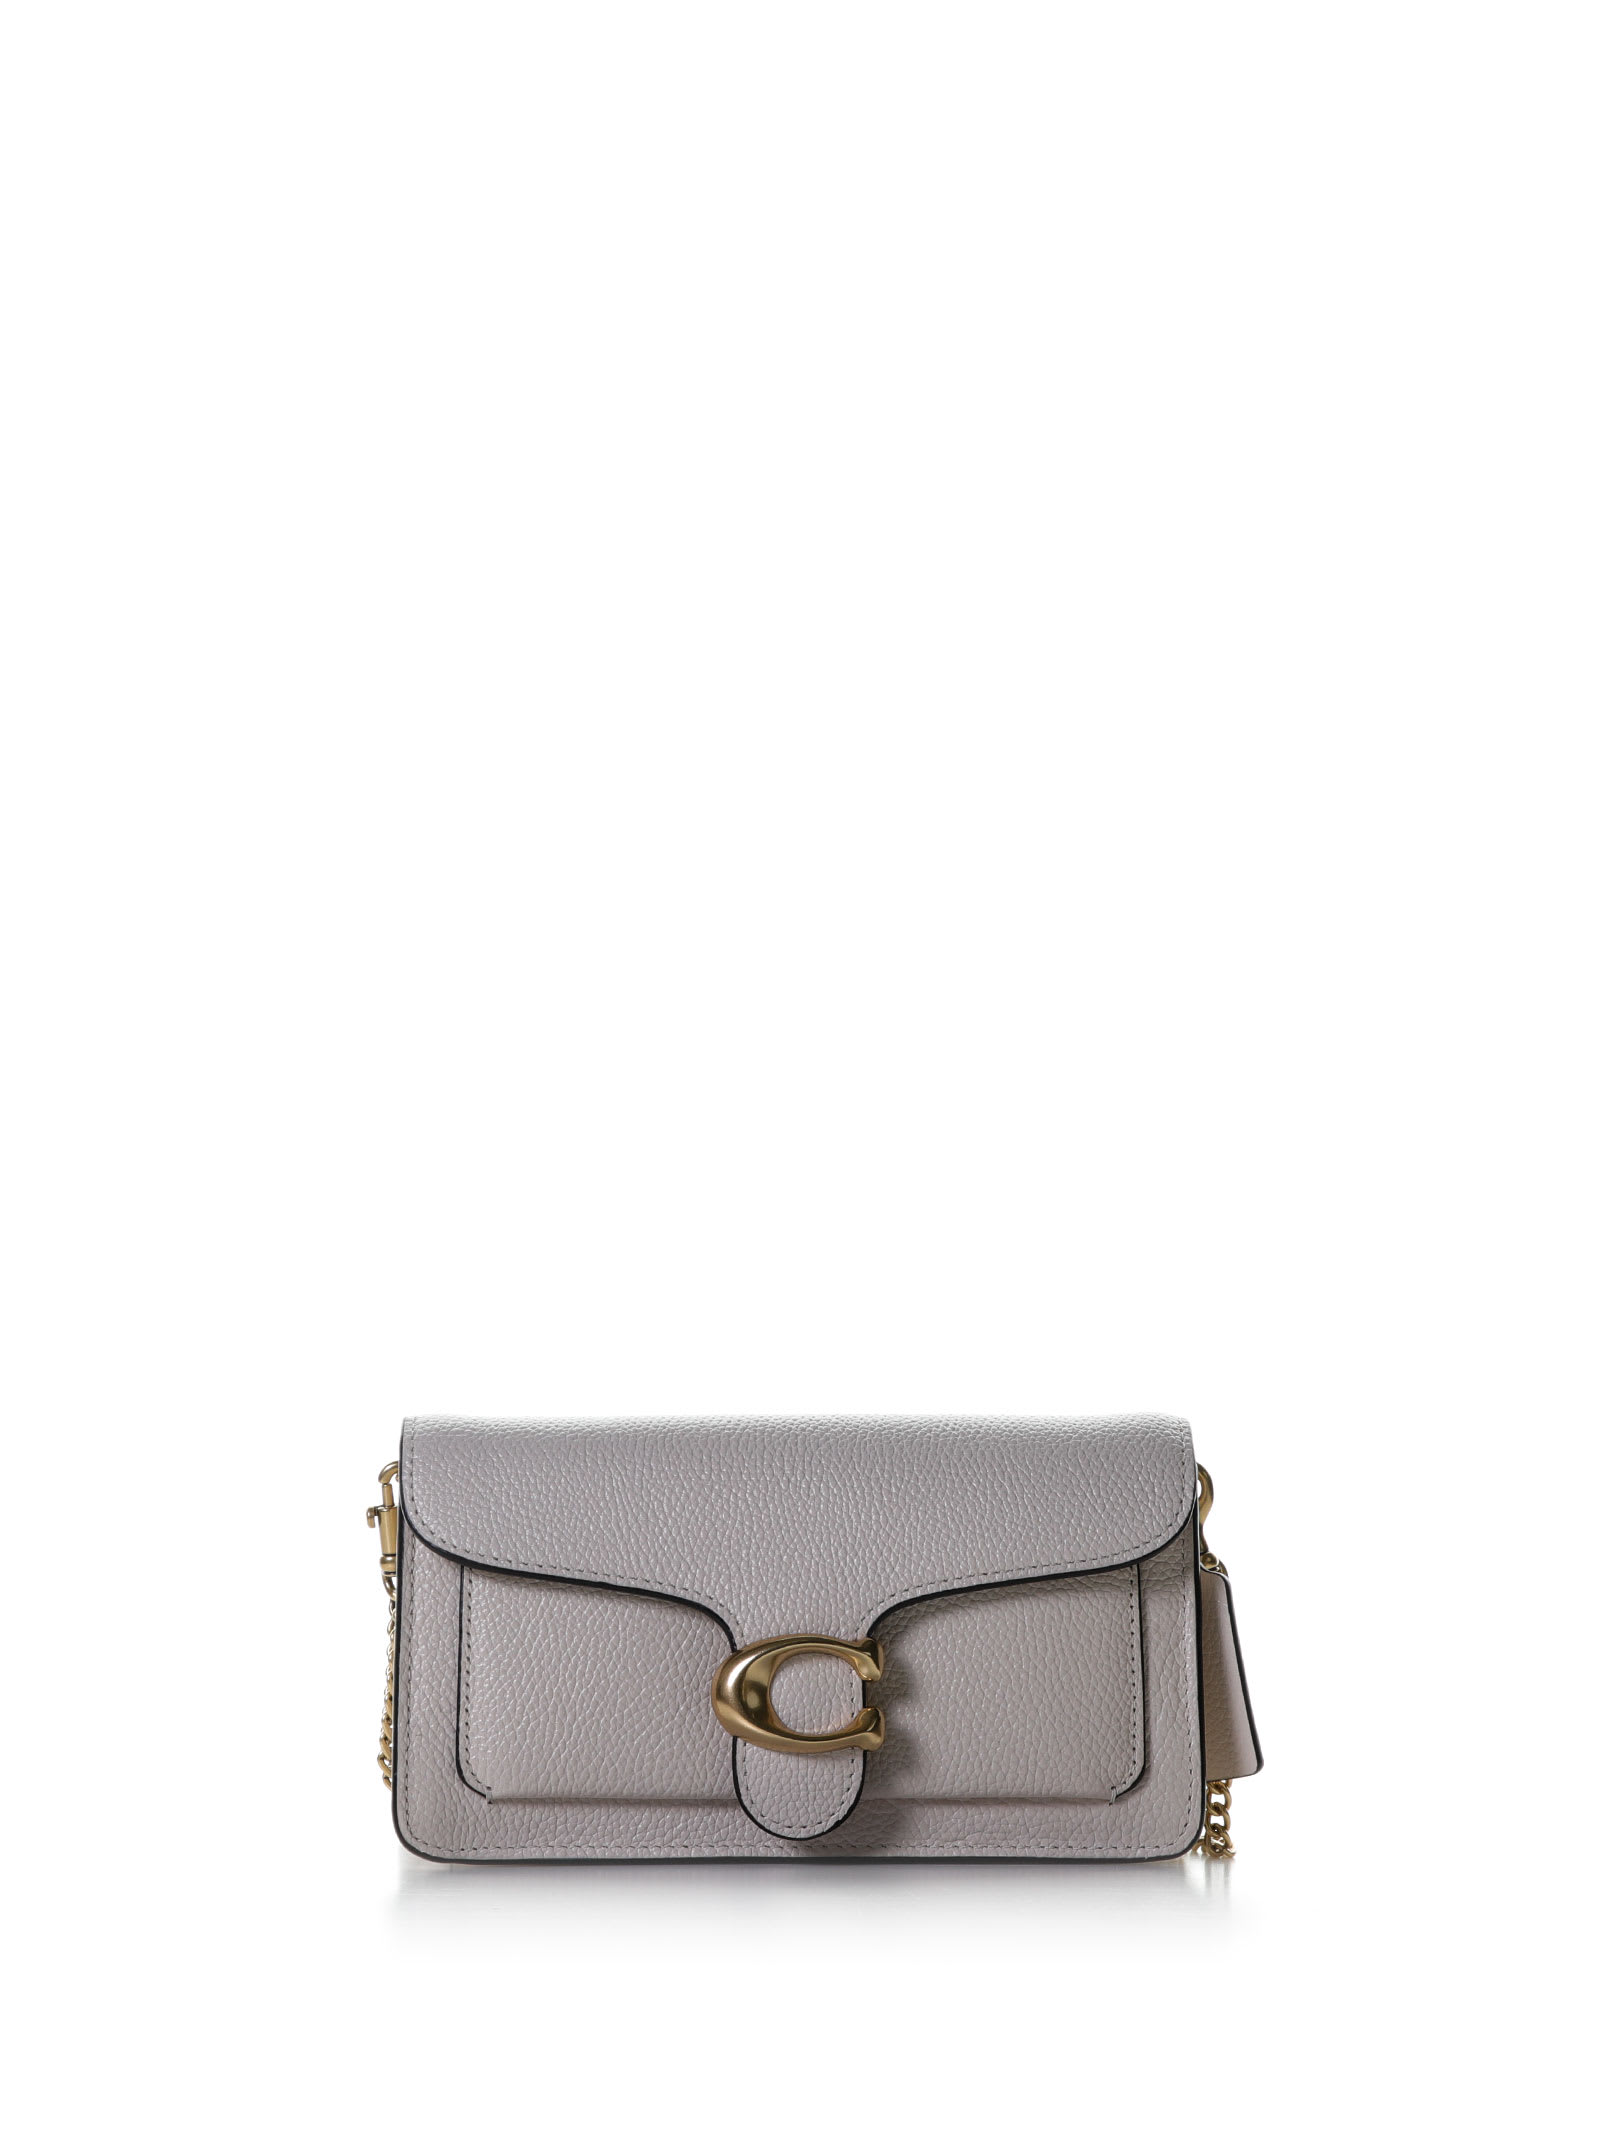 Coach Tabby Pochette With Chain Shoulder Strap In Chalck